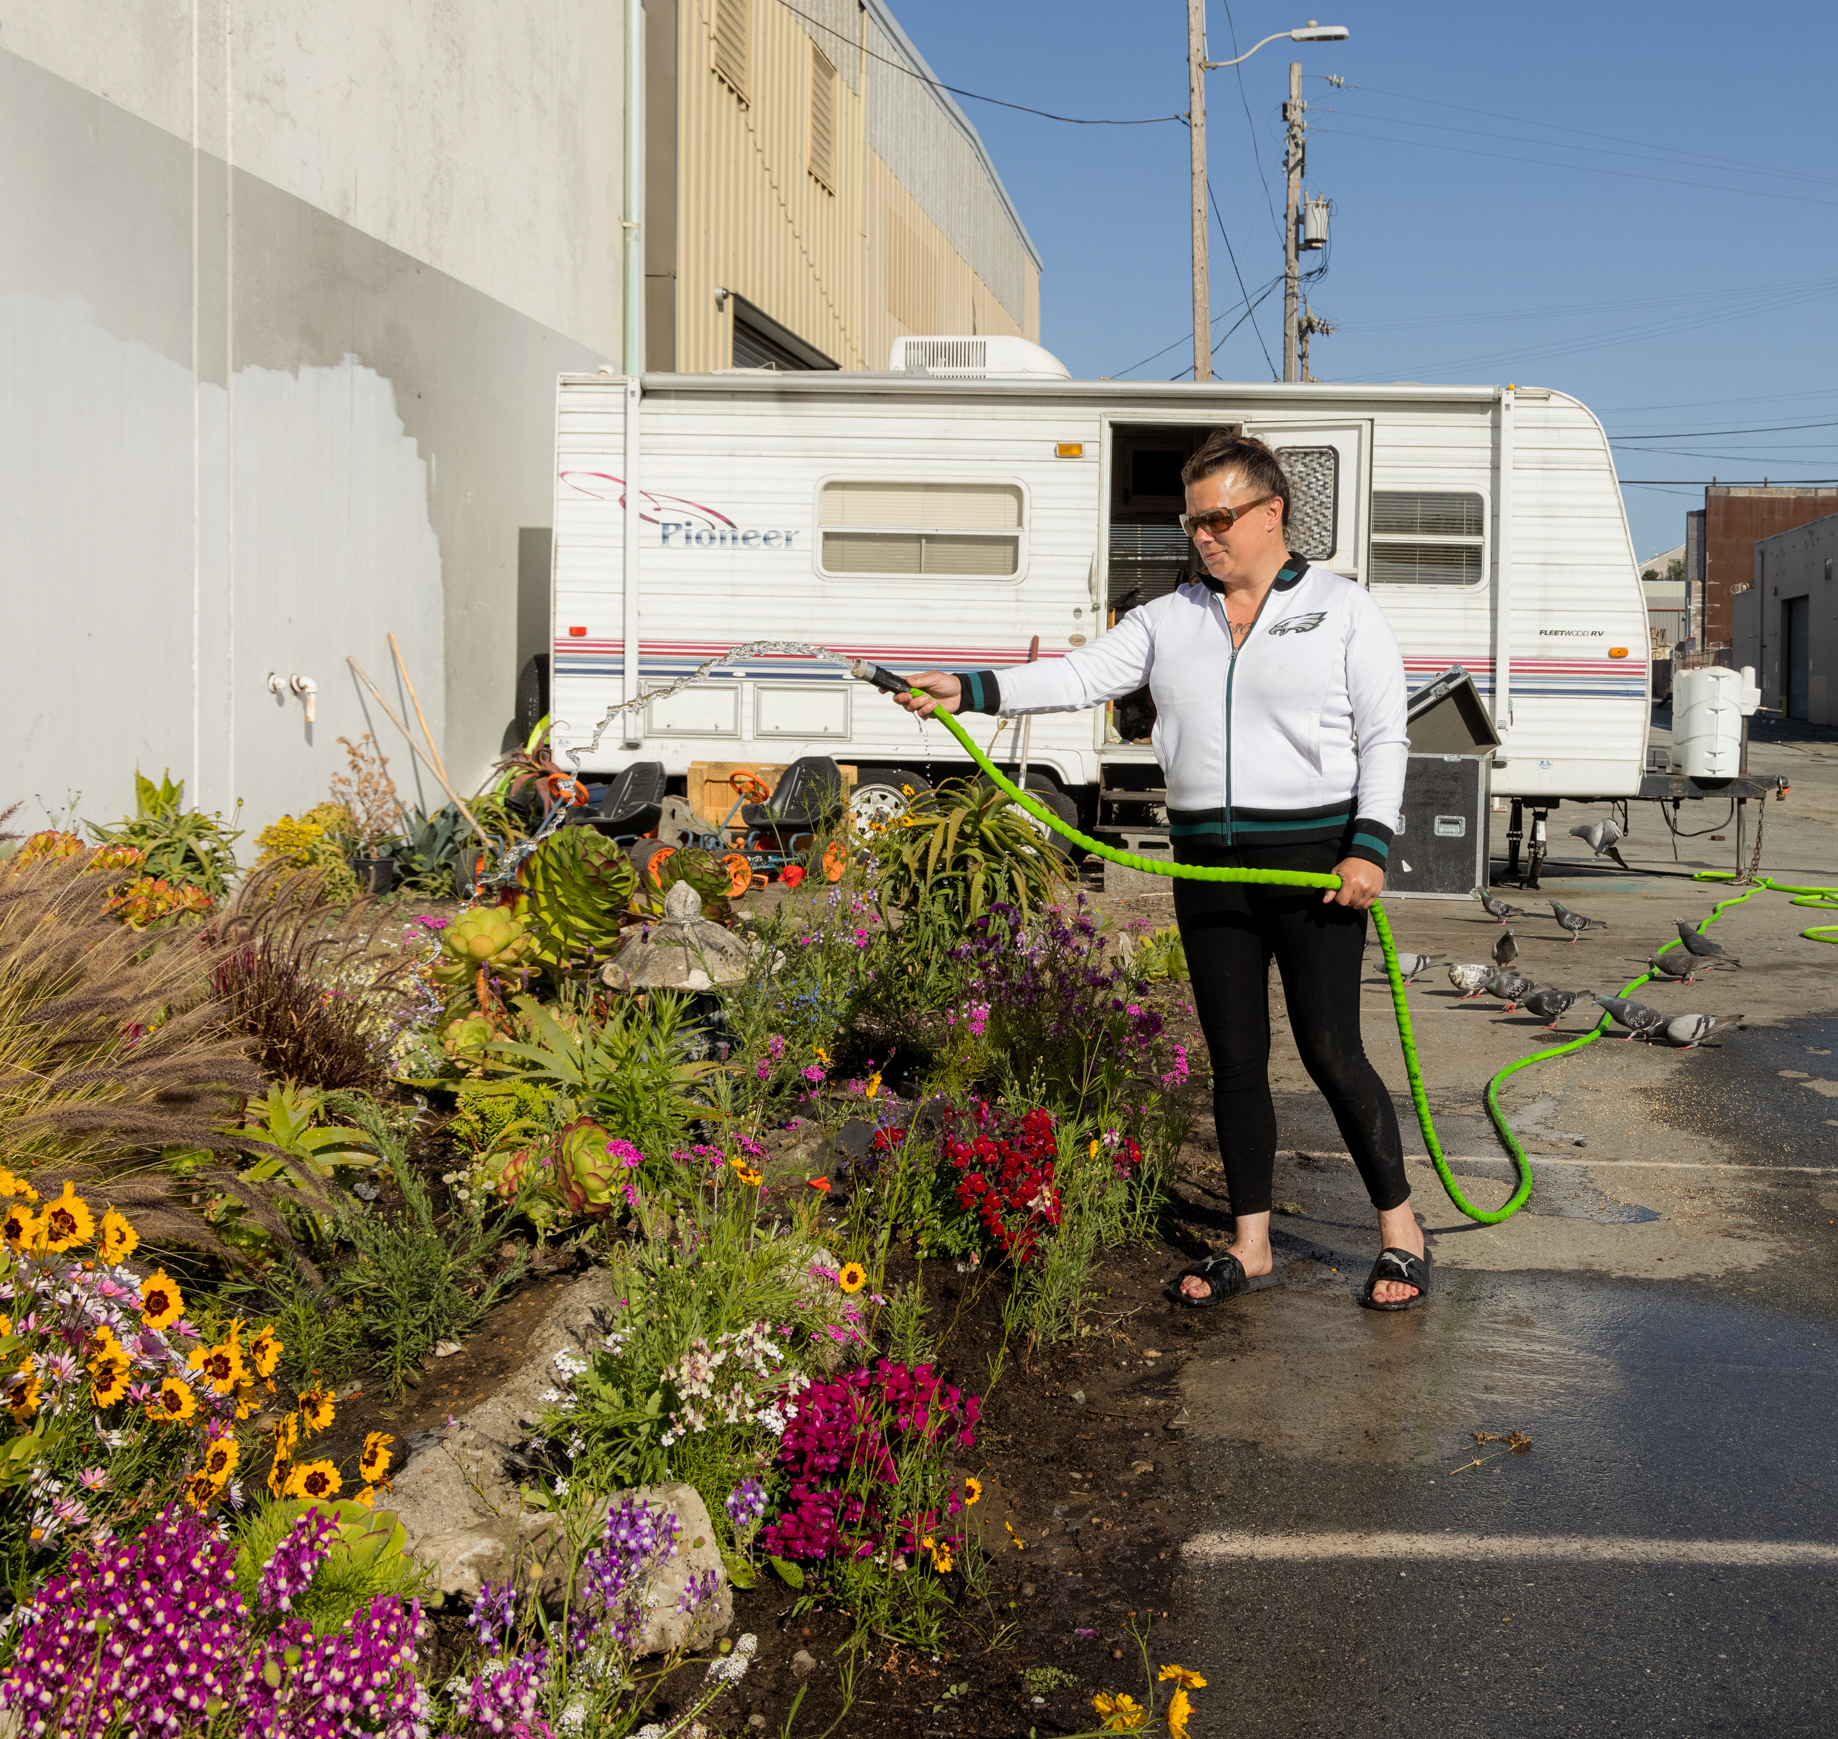 A person waters a colorful garden next to an RV in an industrial area. The garden is filled with various flowers, and the person wears a white jacket and black pants.